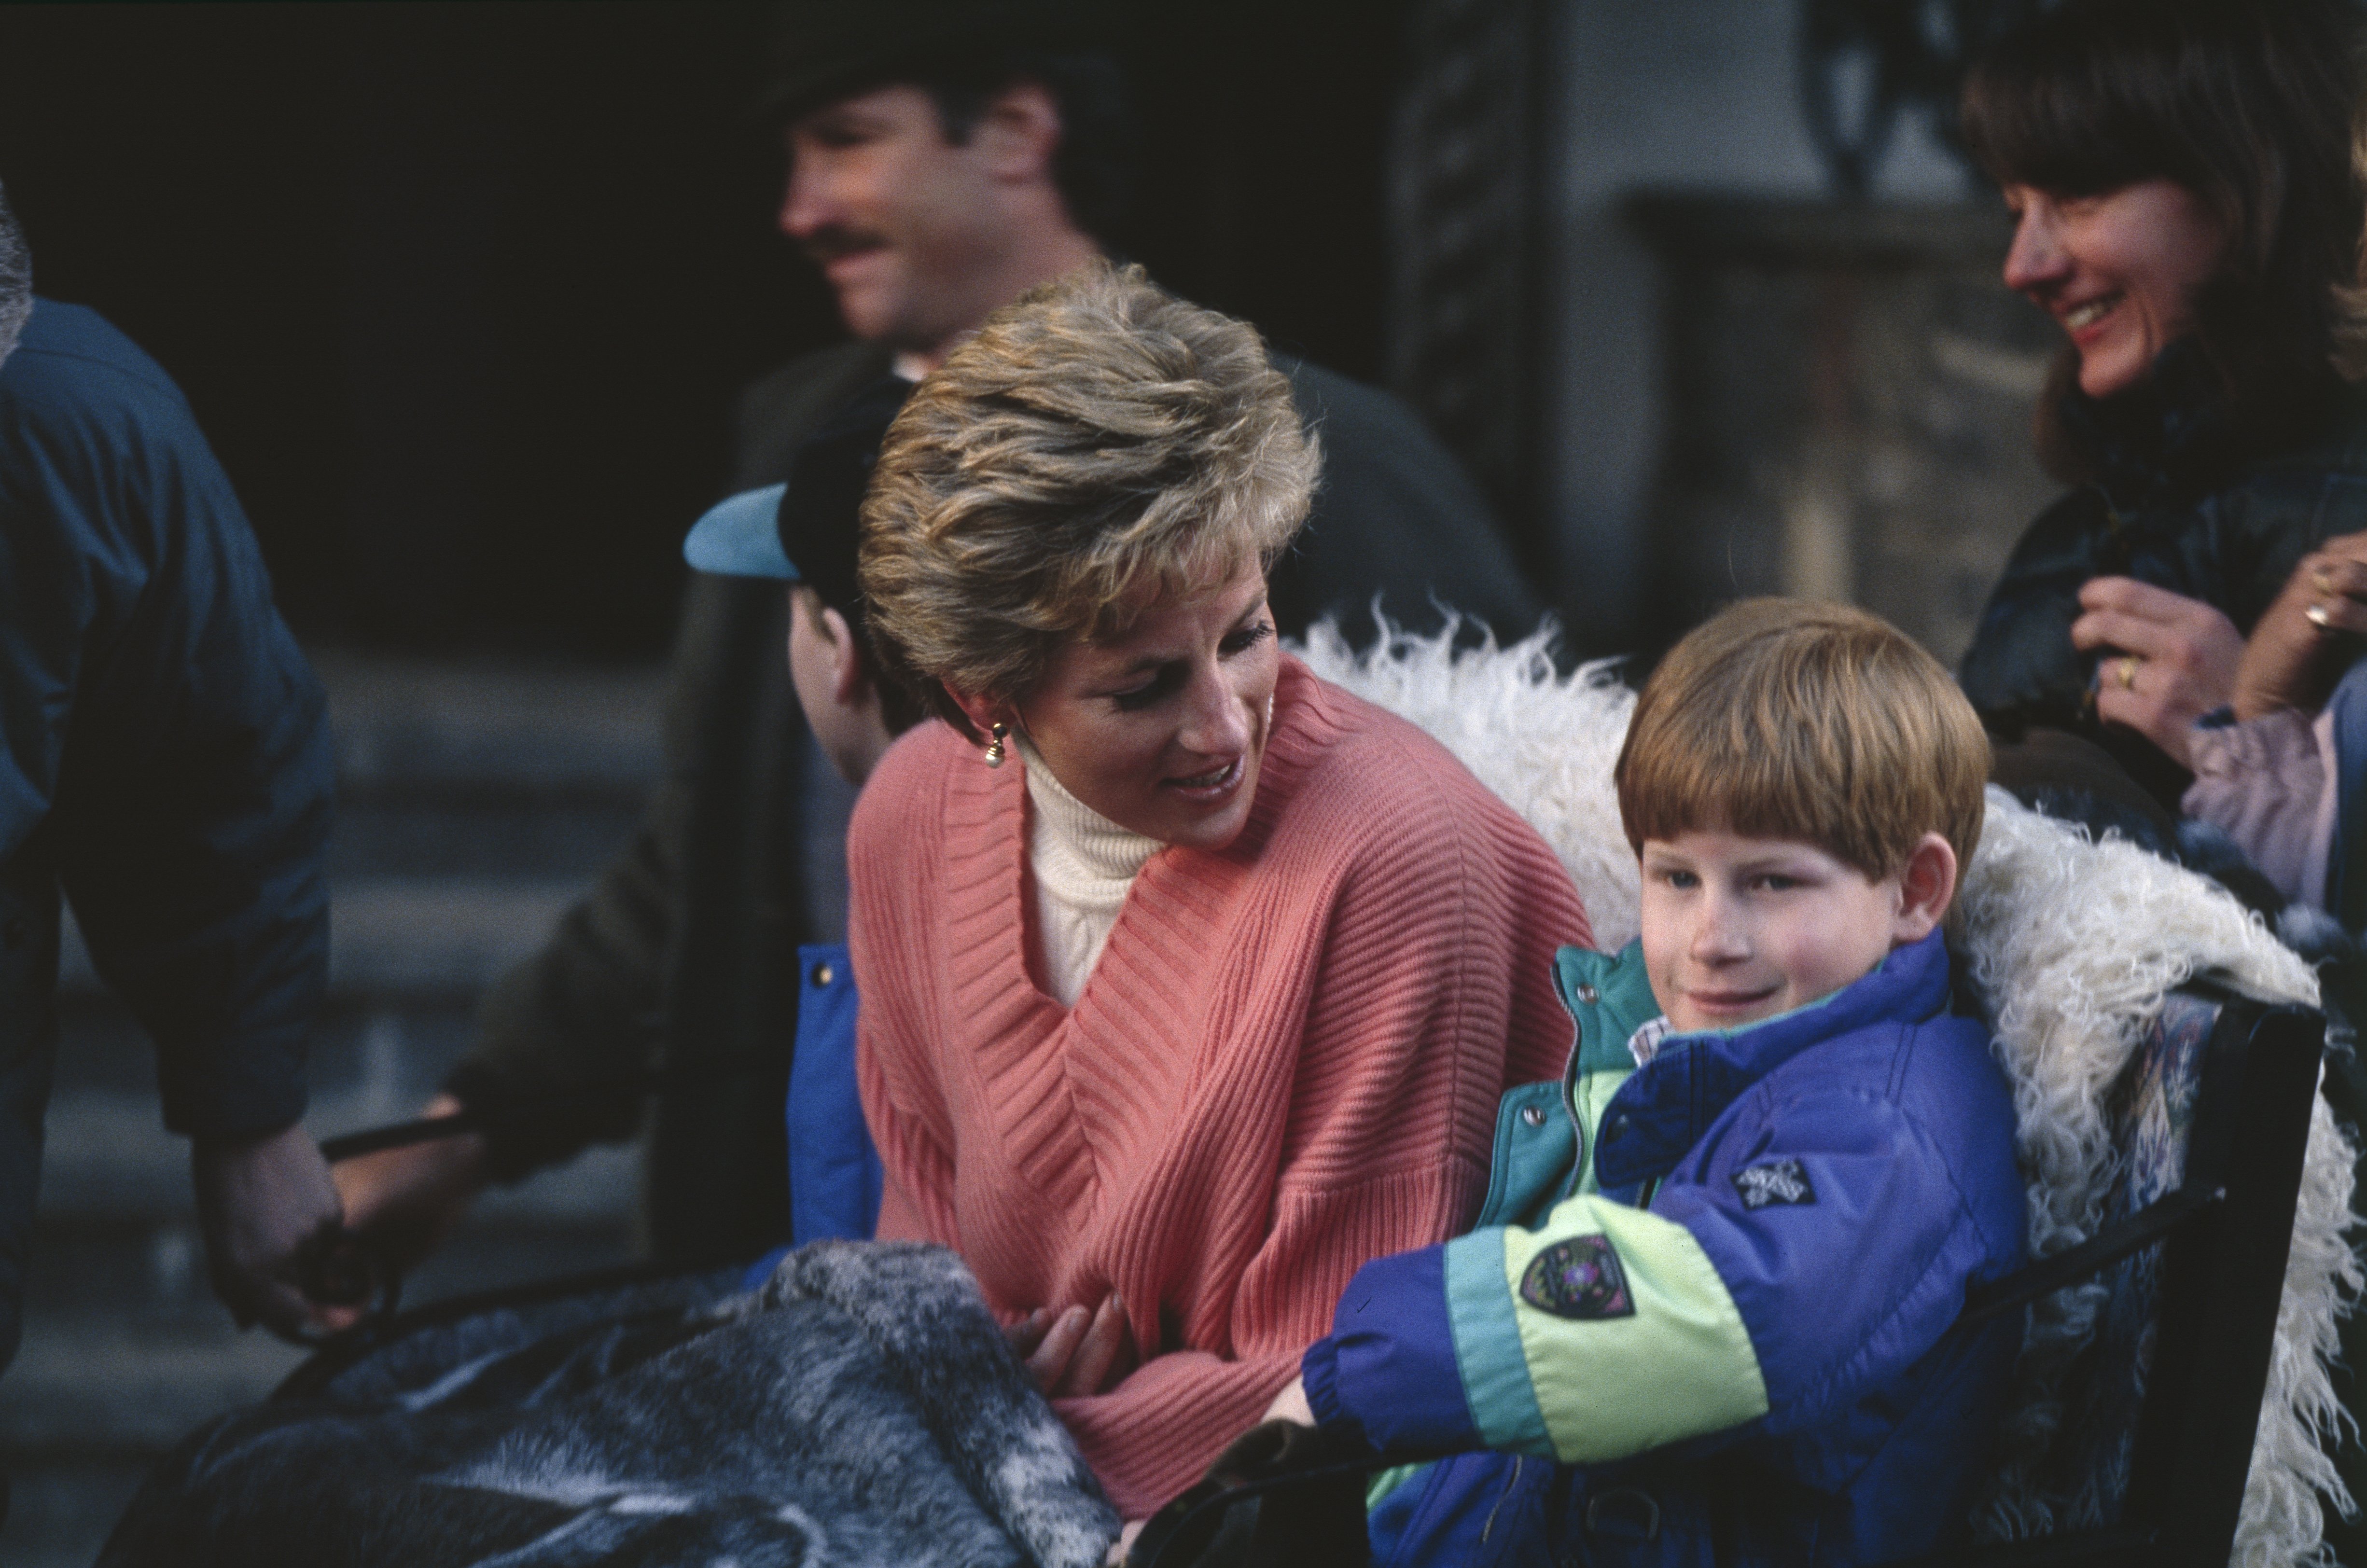 Princess Diana and her sons Prince Harry and Prince William (in cap behind his mother) during a holiday in the Austrian resort of Lech on March 24, 1994. / Source: Getty Images